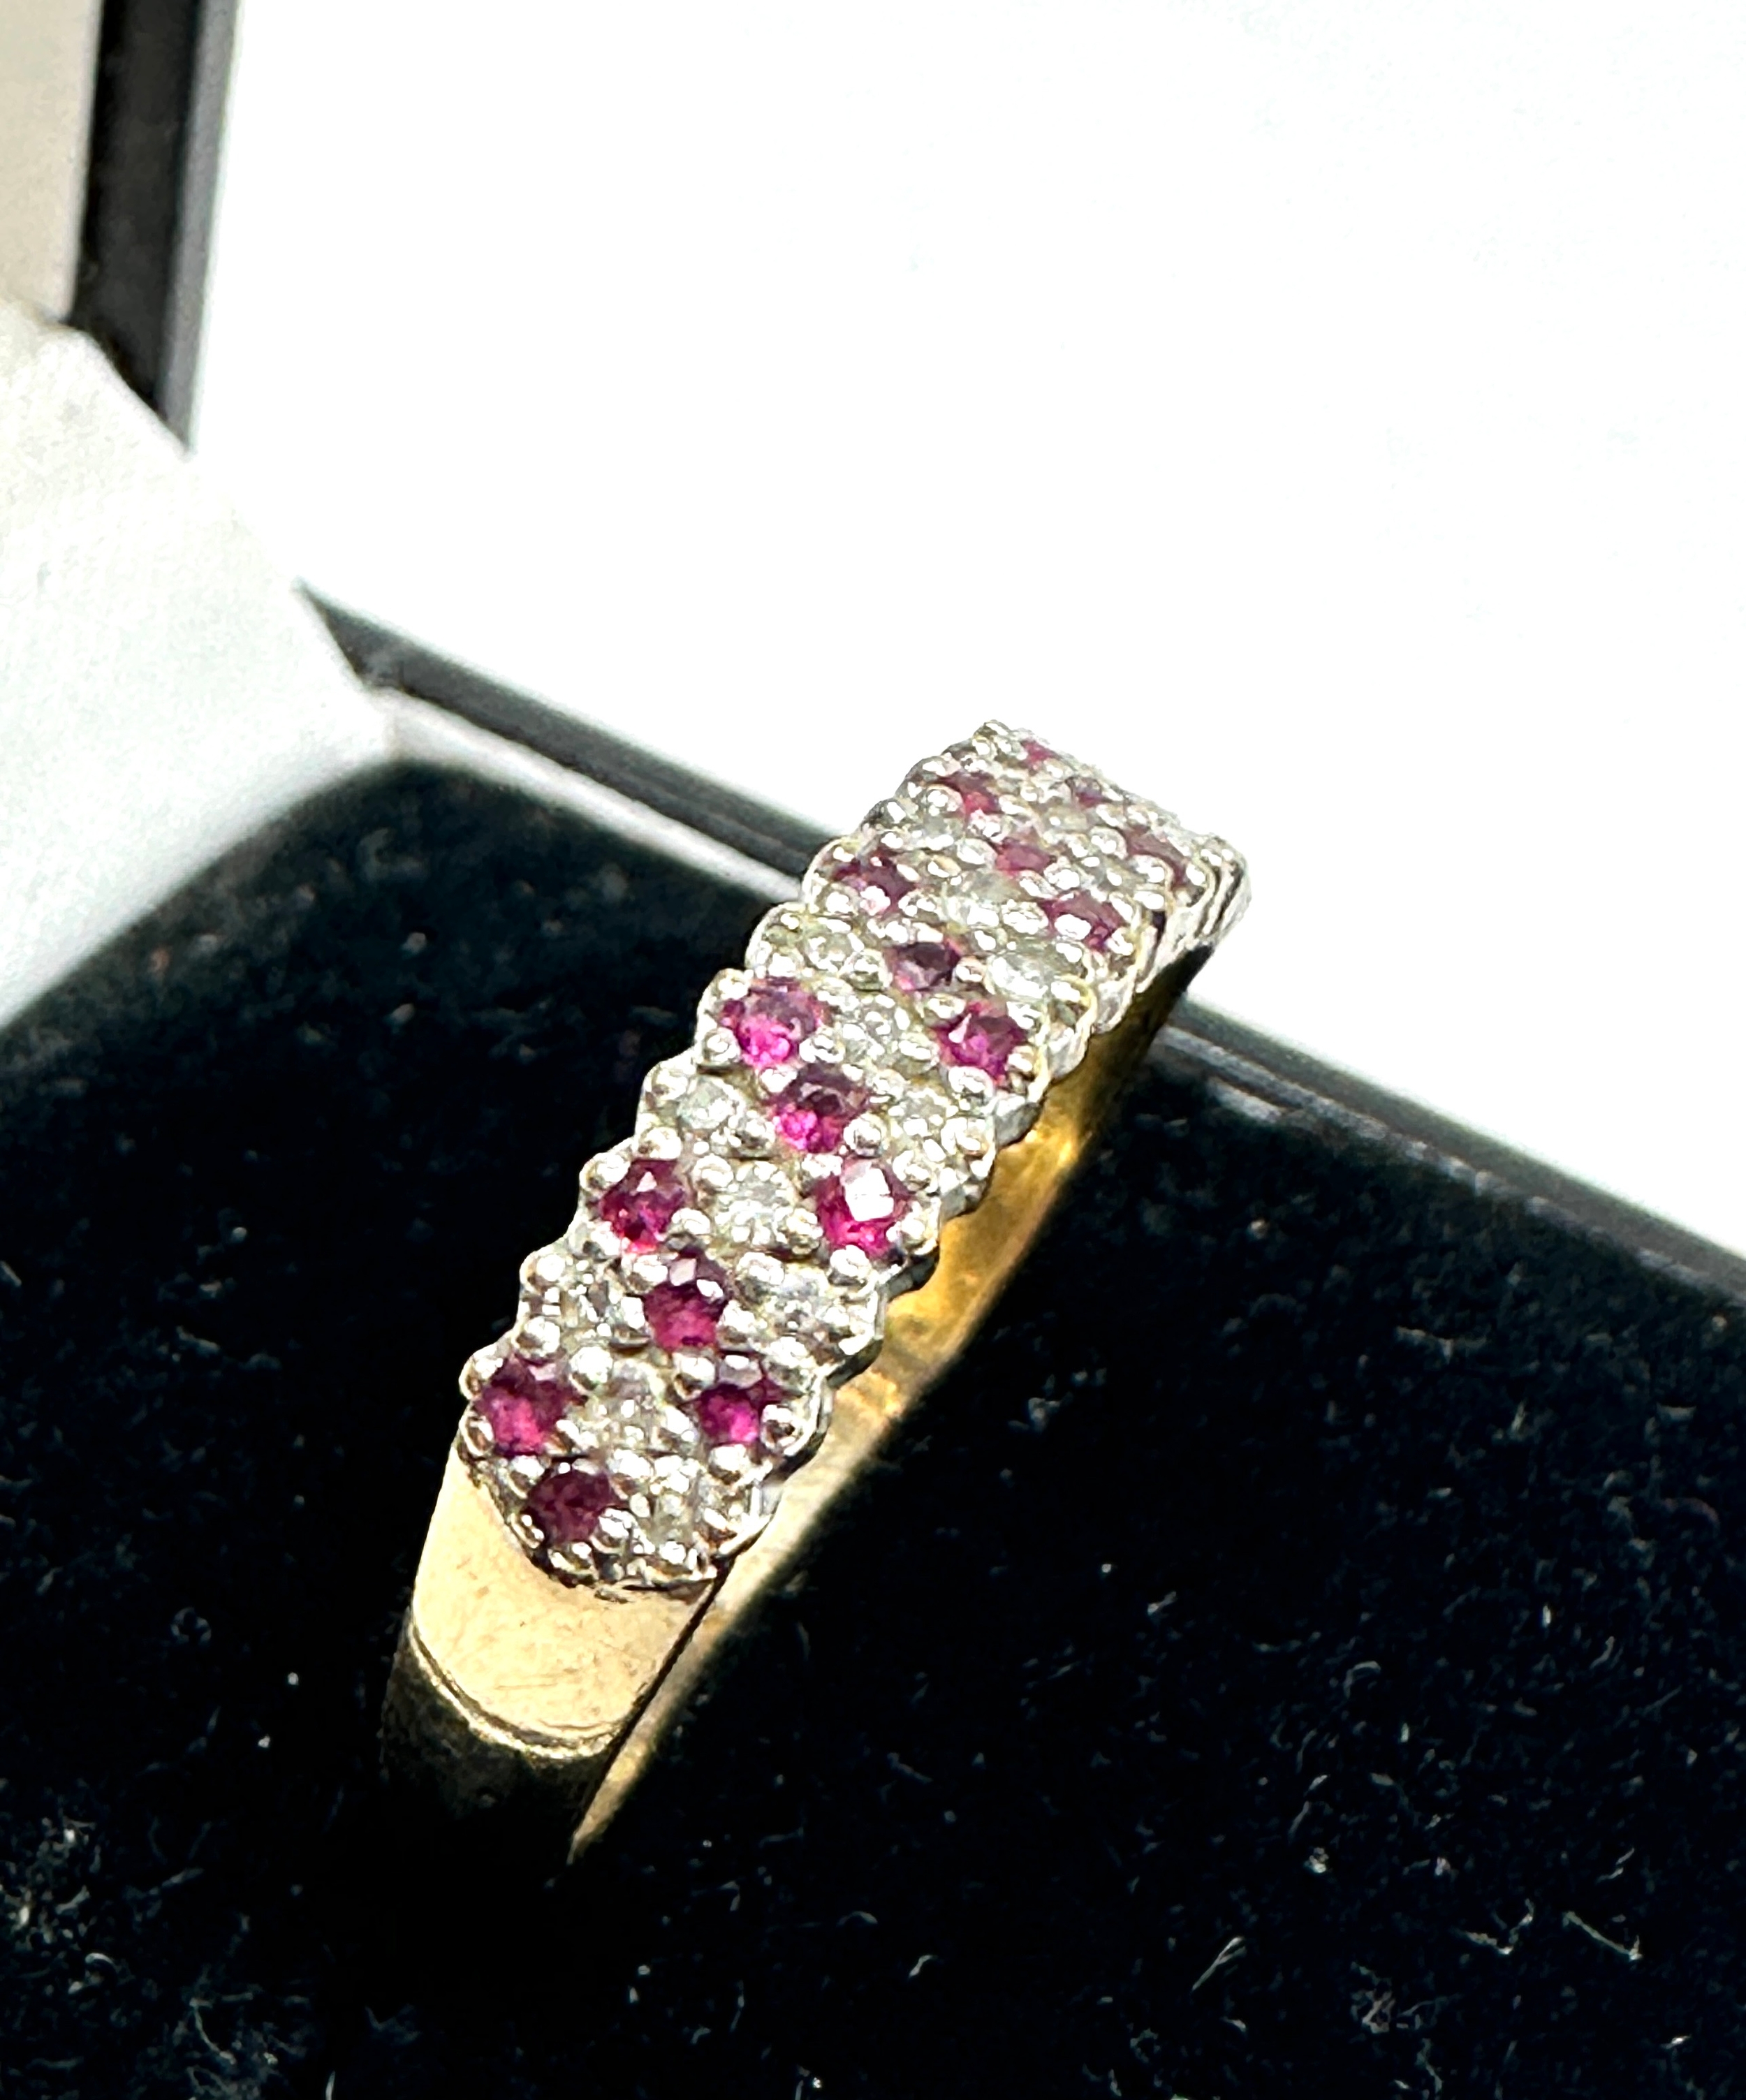 9ct gold Amethyst & diamond ring weight 2.5g - Image 2 of 4